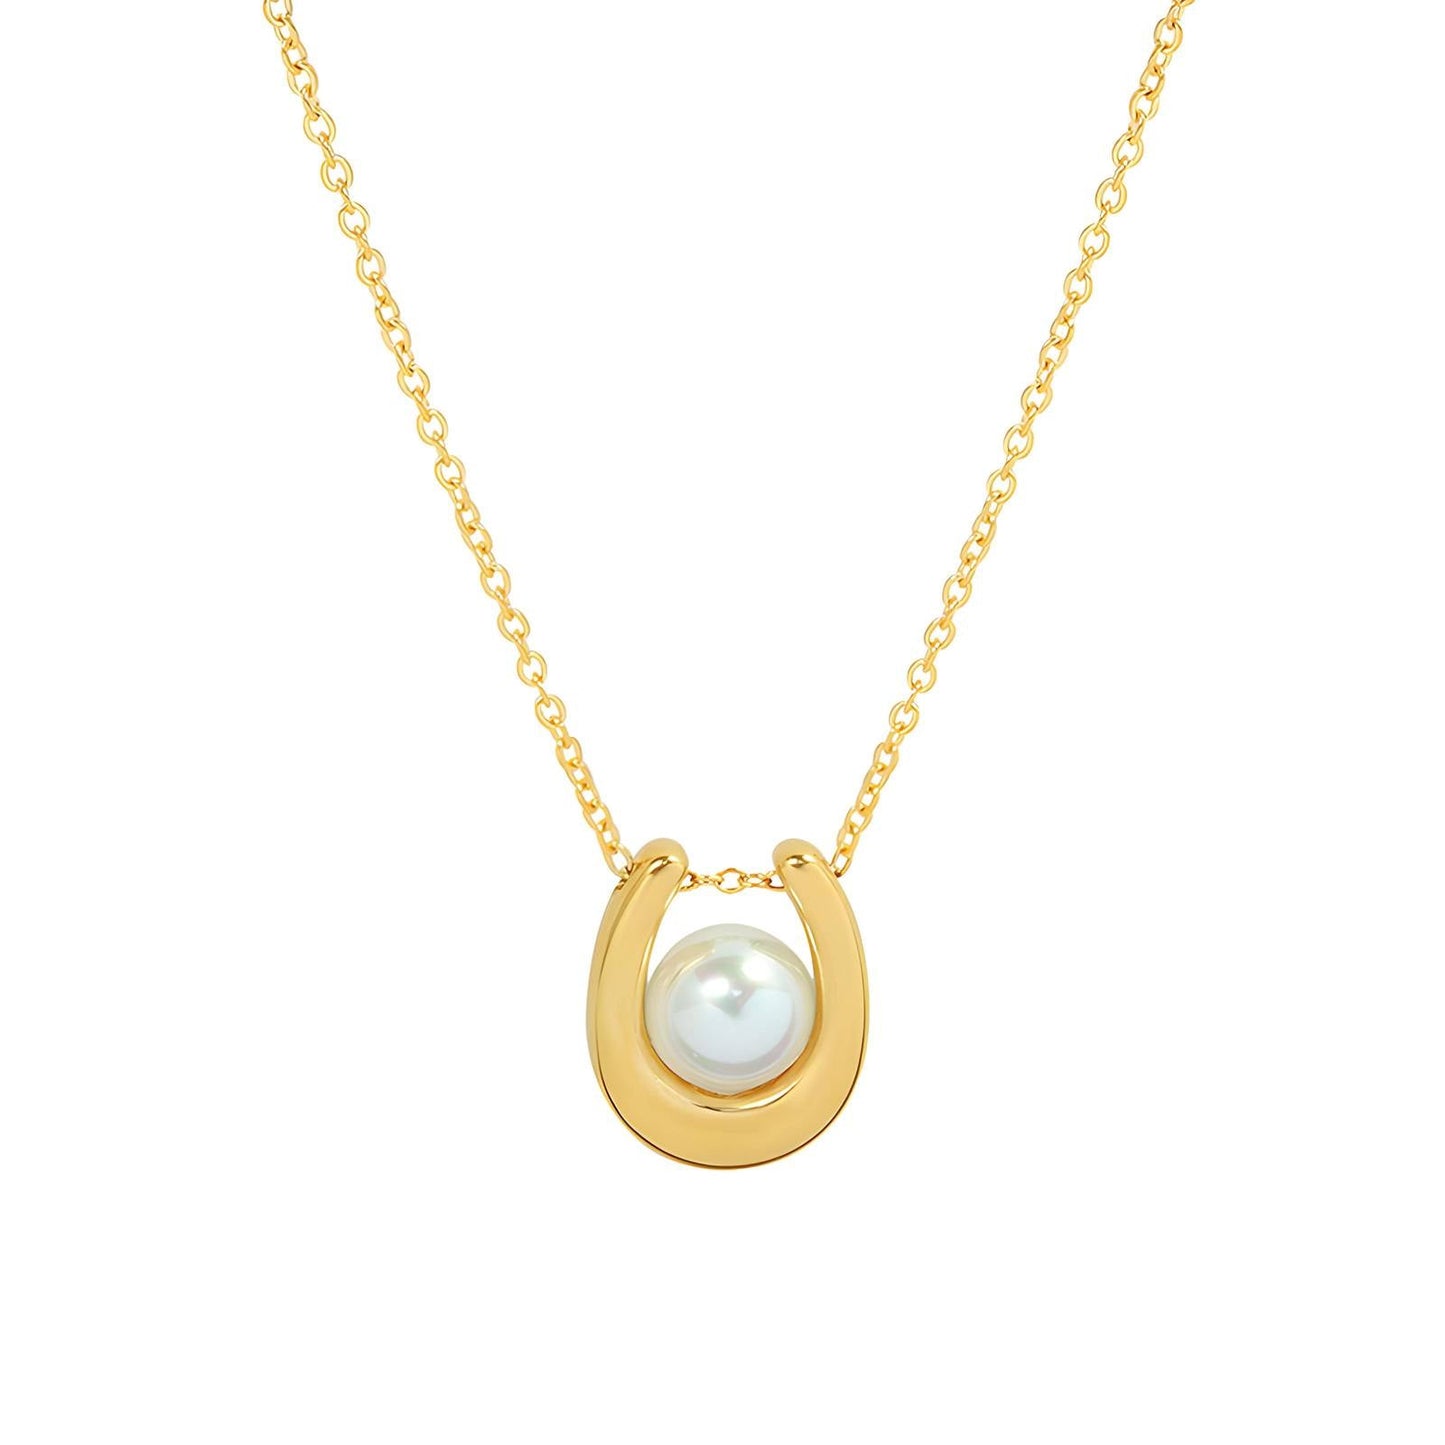 Hold onto the pearl necklace - Gold Plated Tarnish Free Jewellery